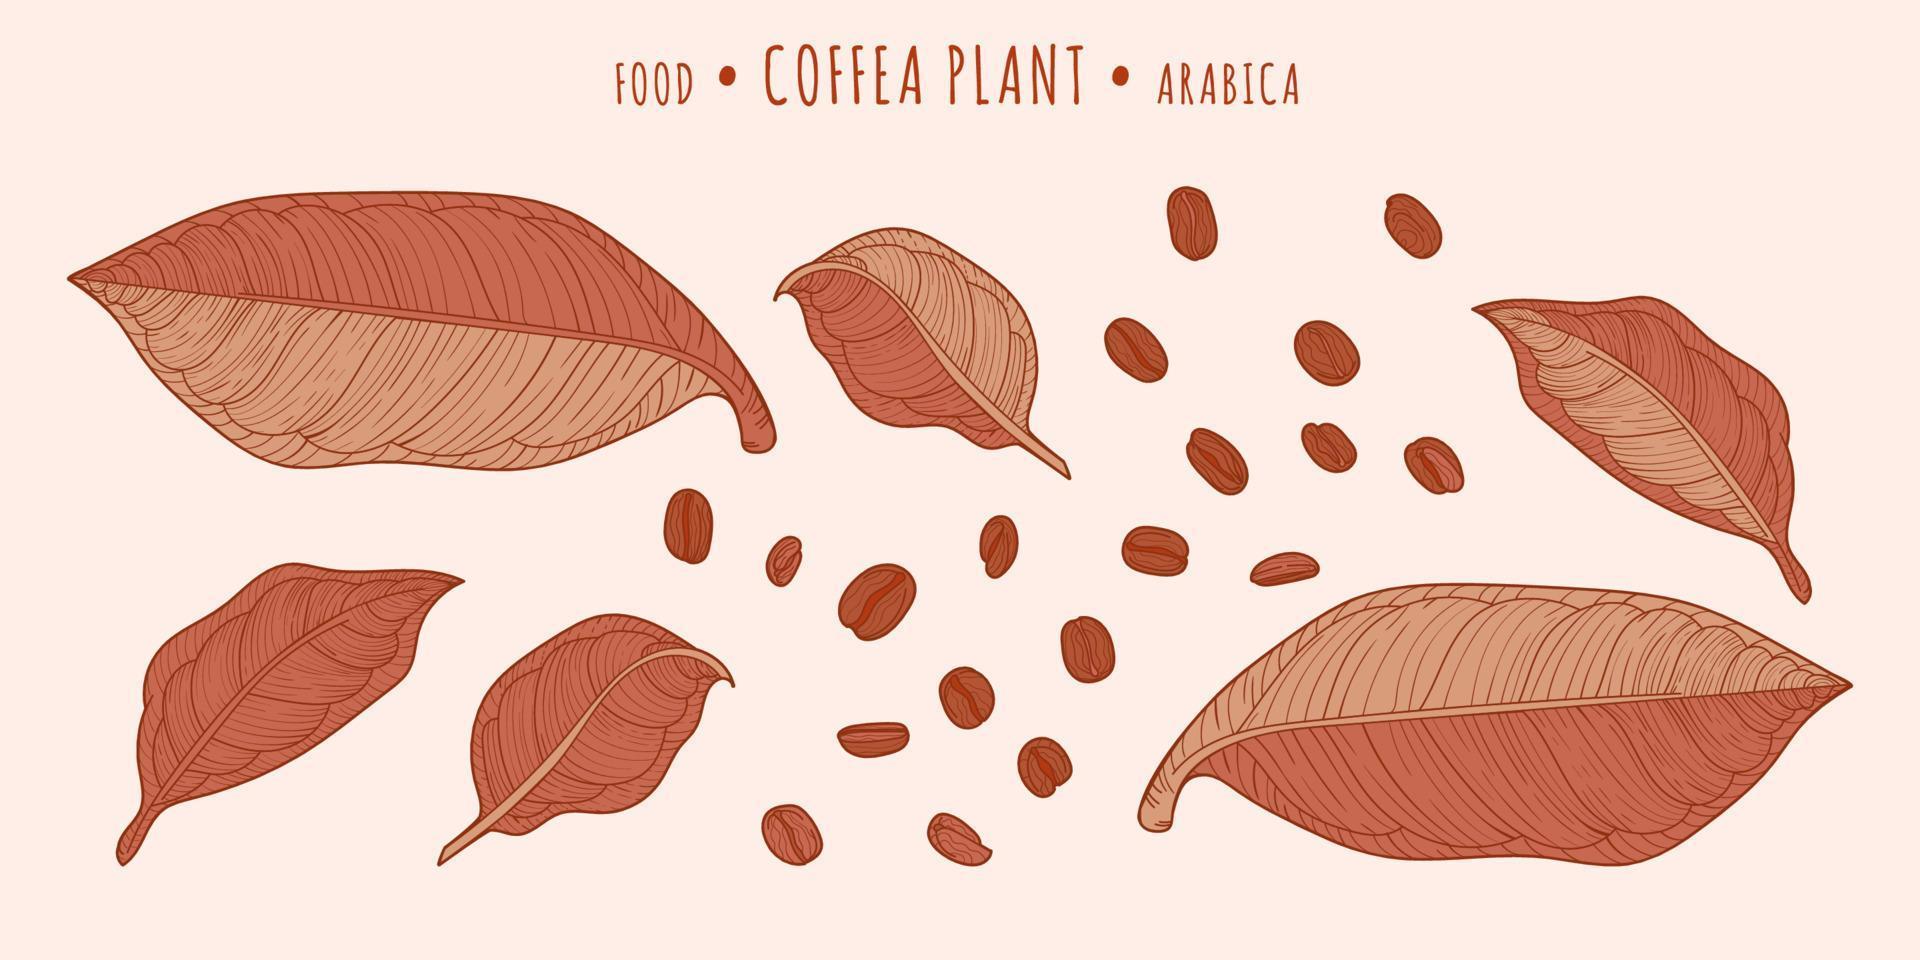 Coffea plant. Coffee beans and leaves vector